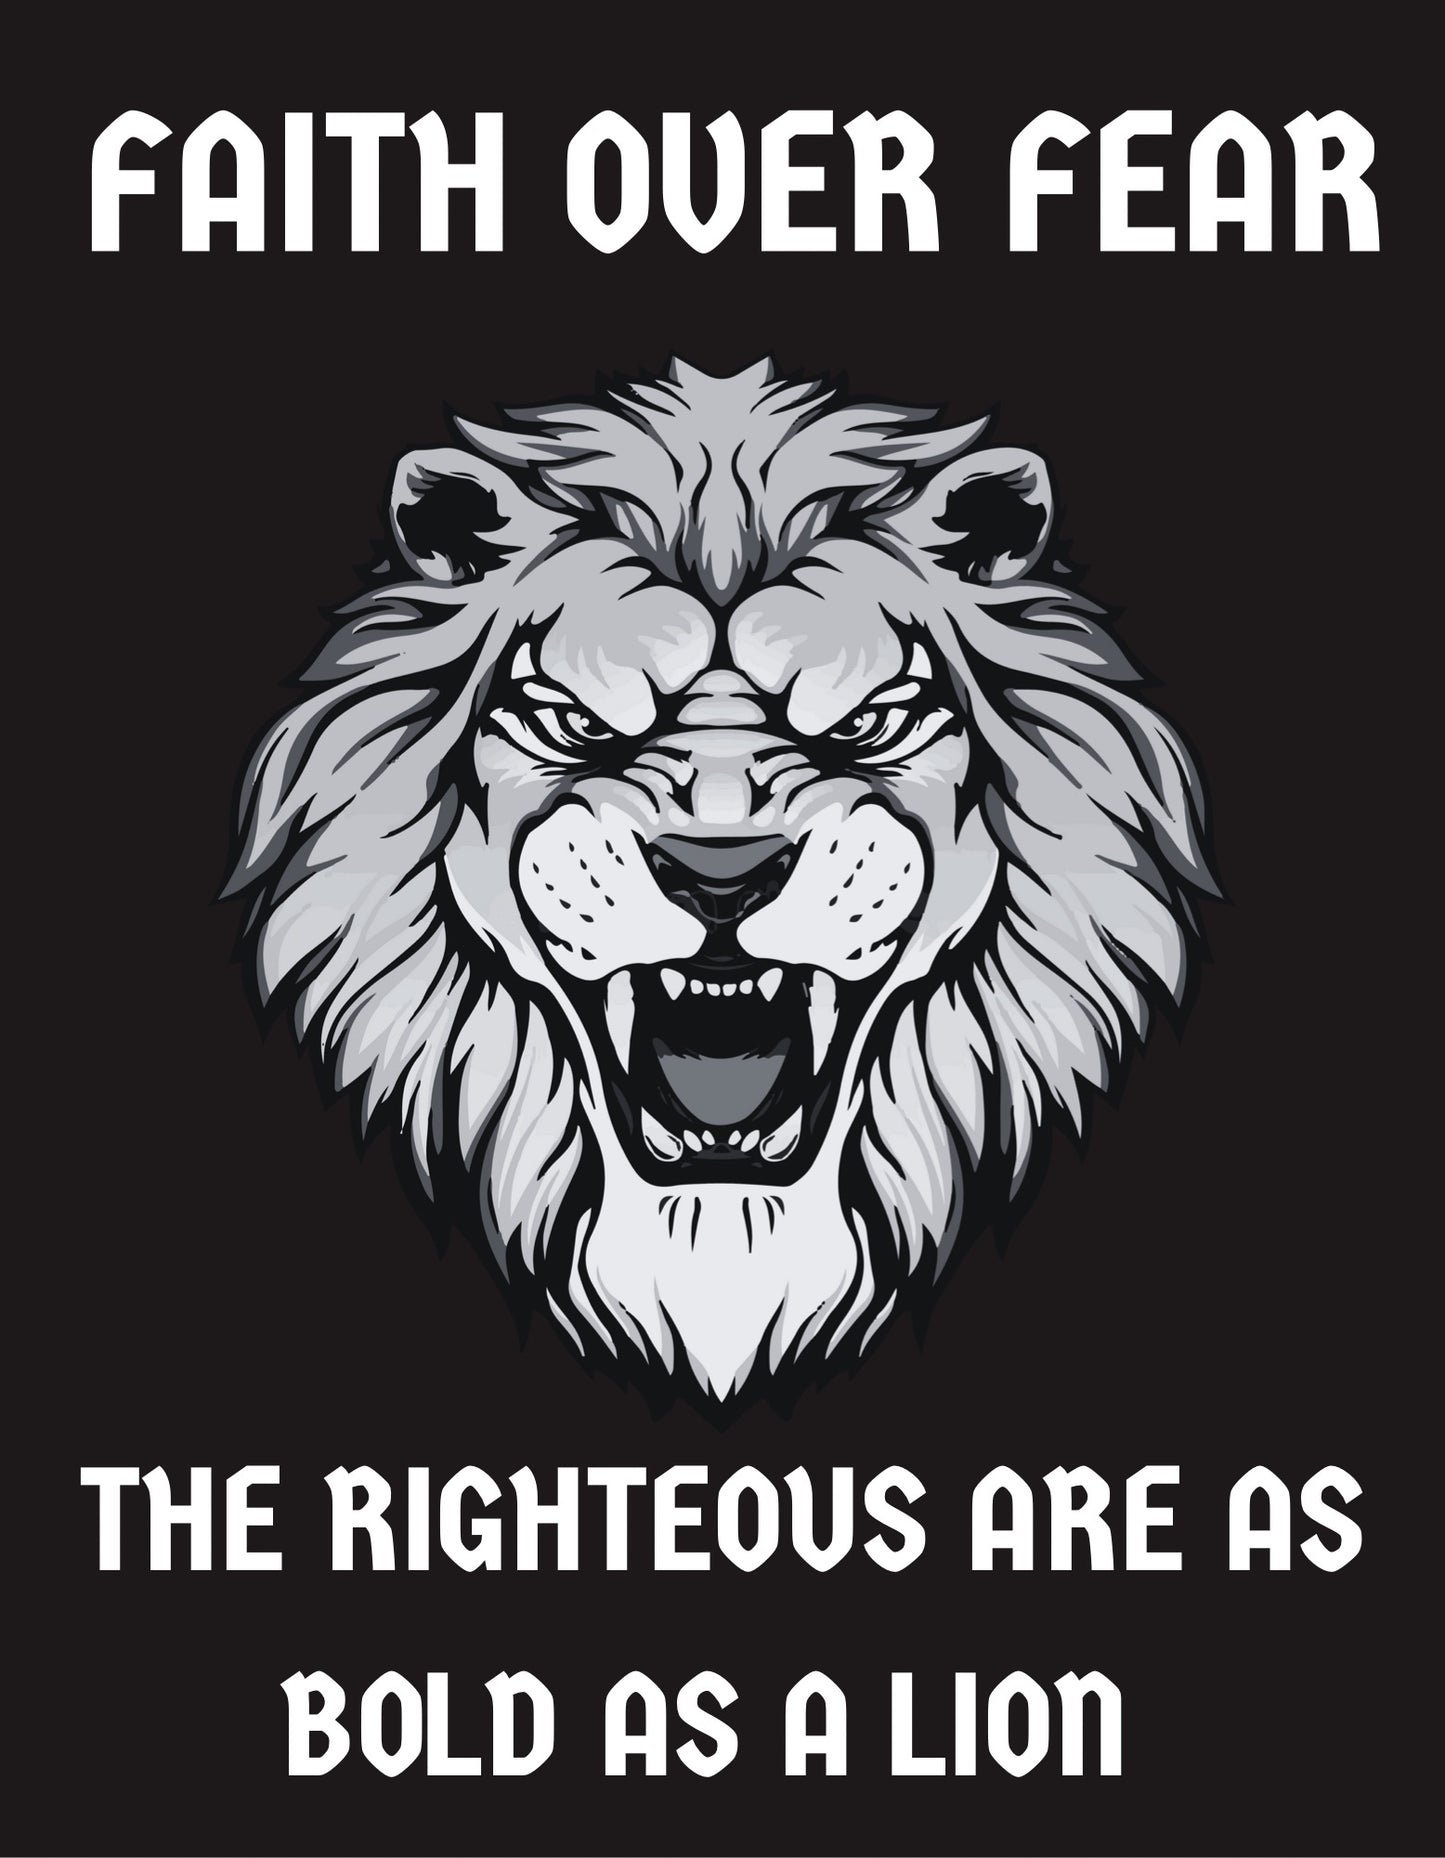 Righteous are Bold as Lions